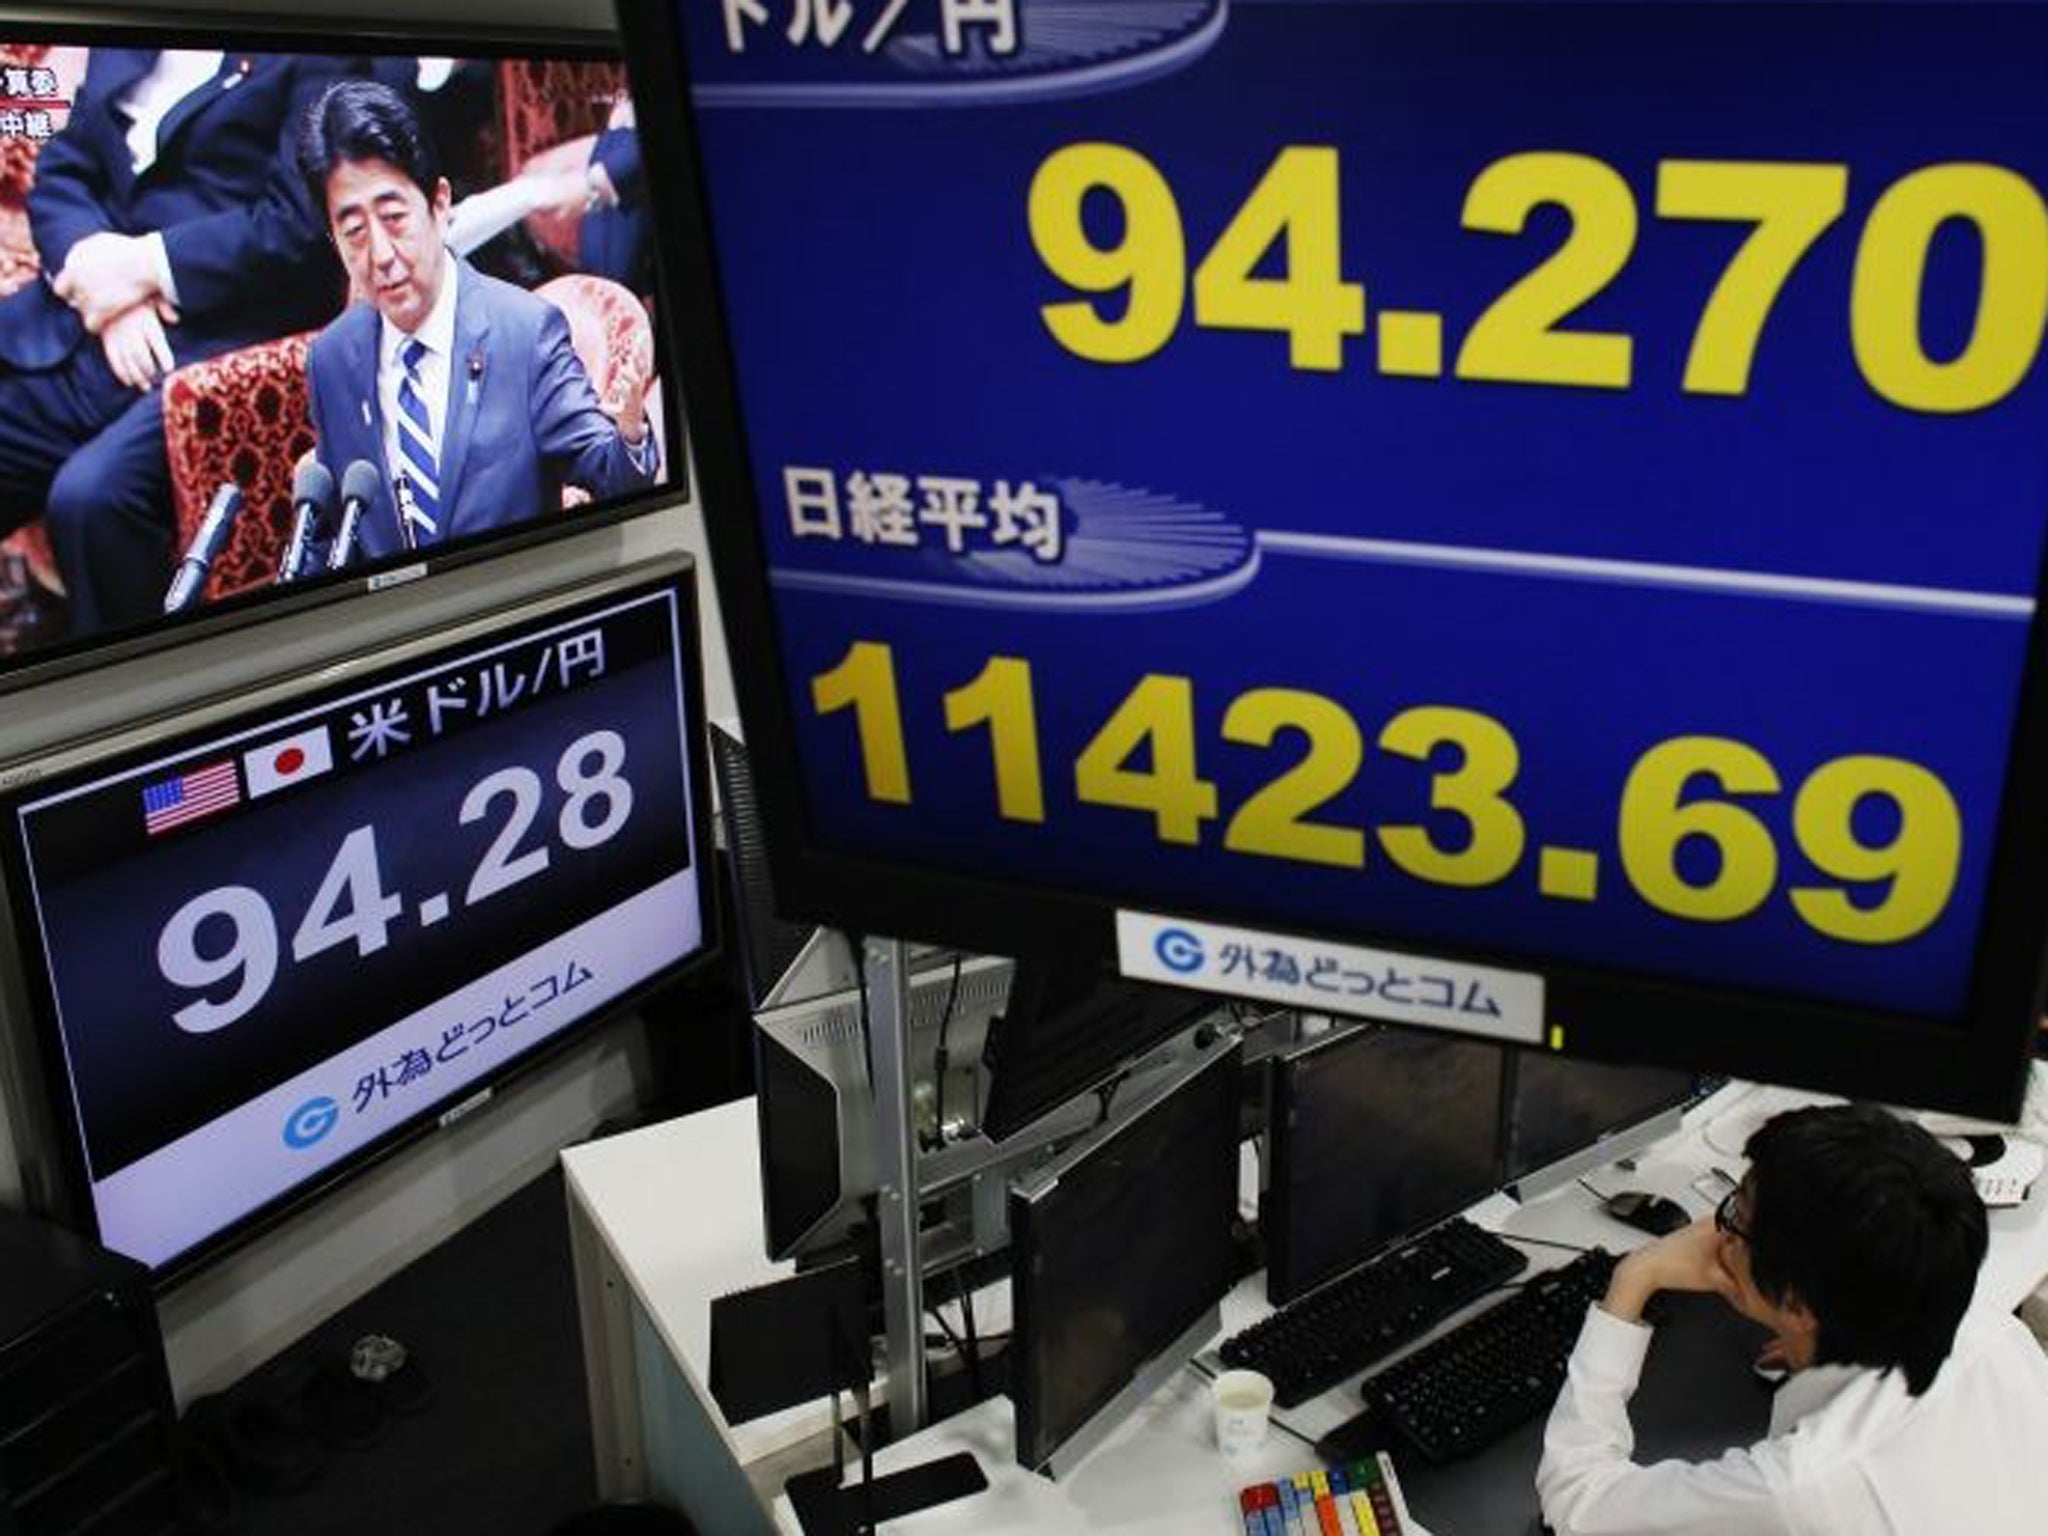 The Japanese stock exchange is expected to rally as Prime Minister Shinzo Abe campaigns to be re-elected